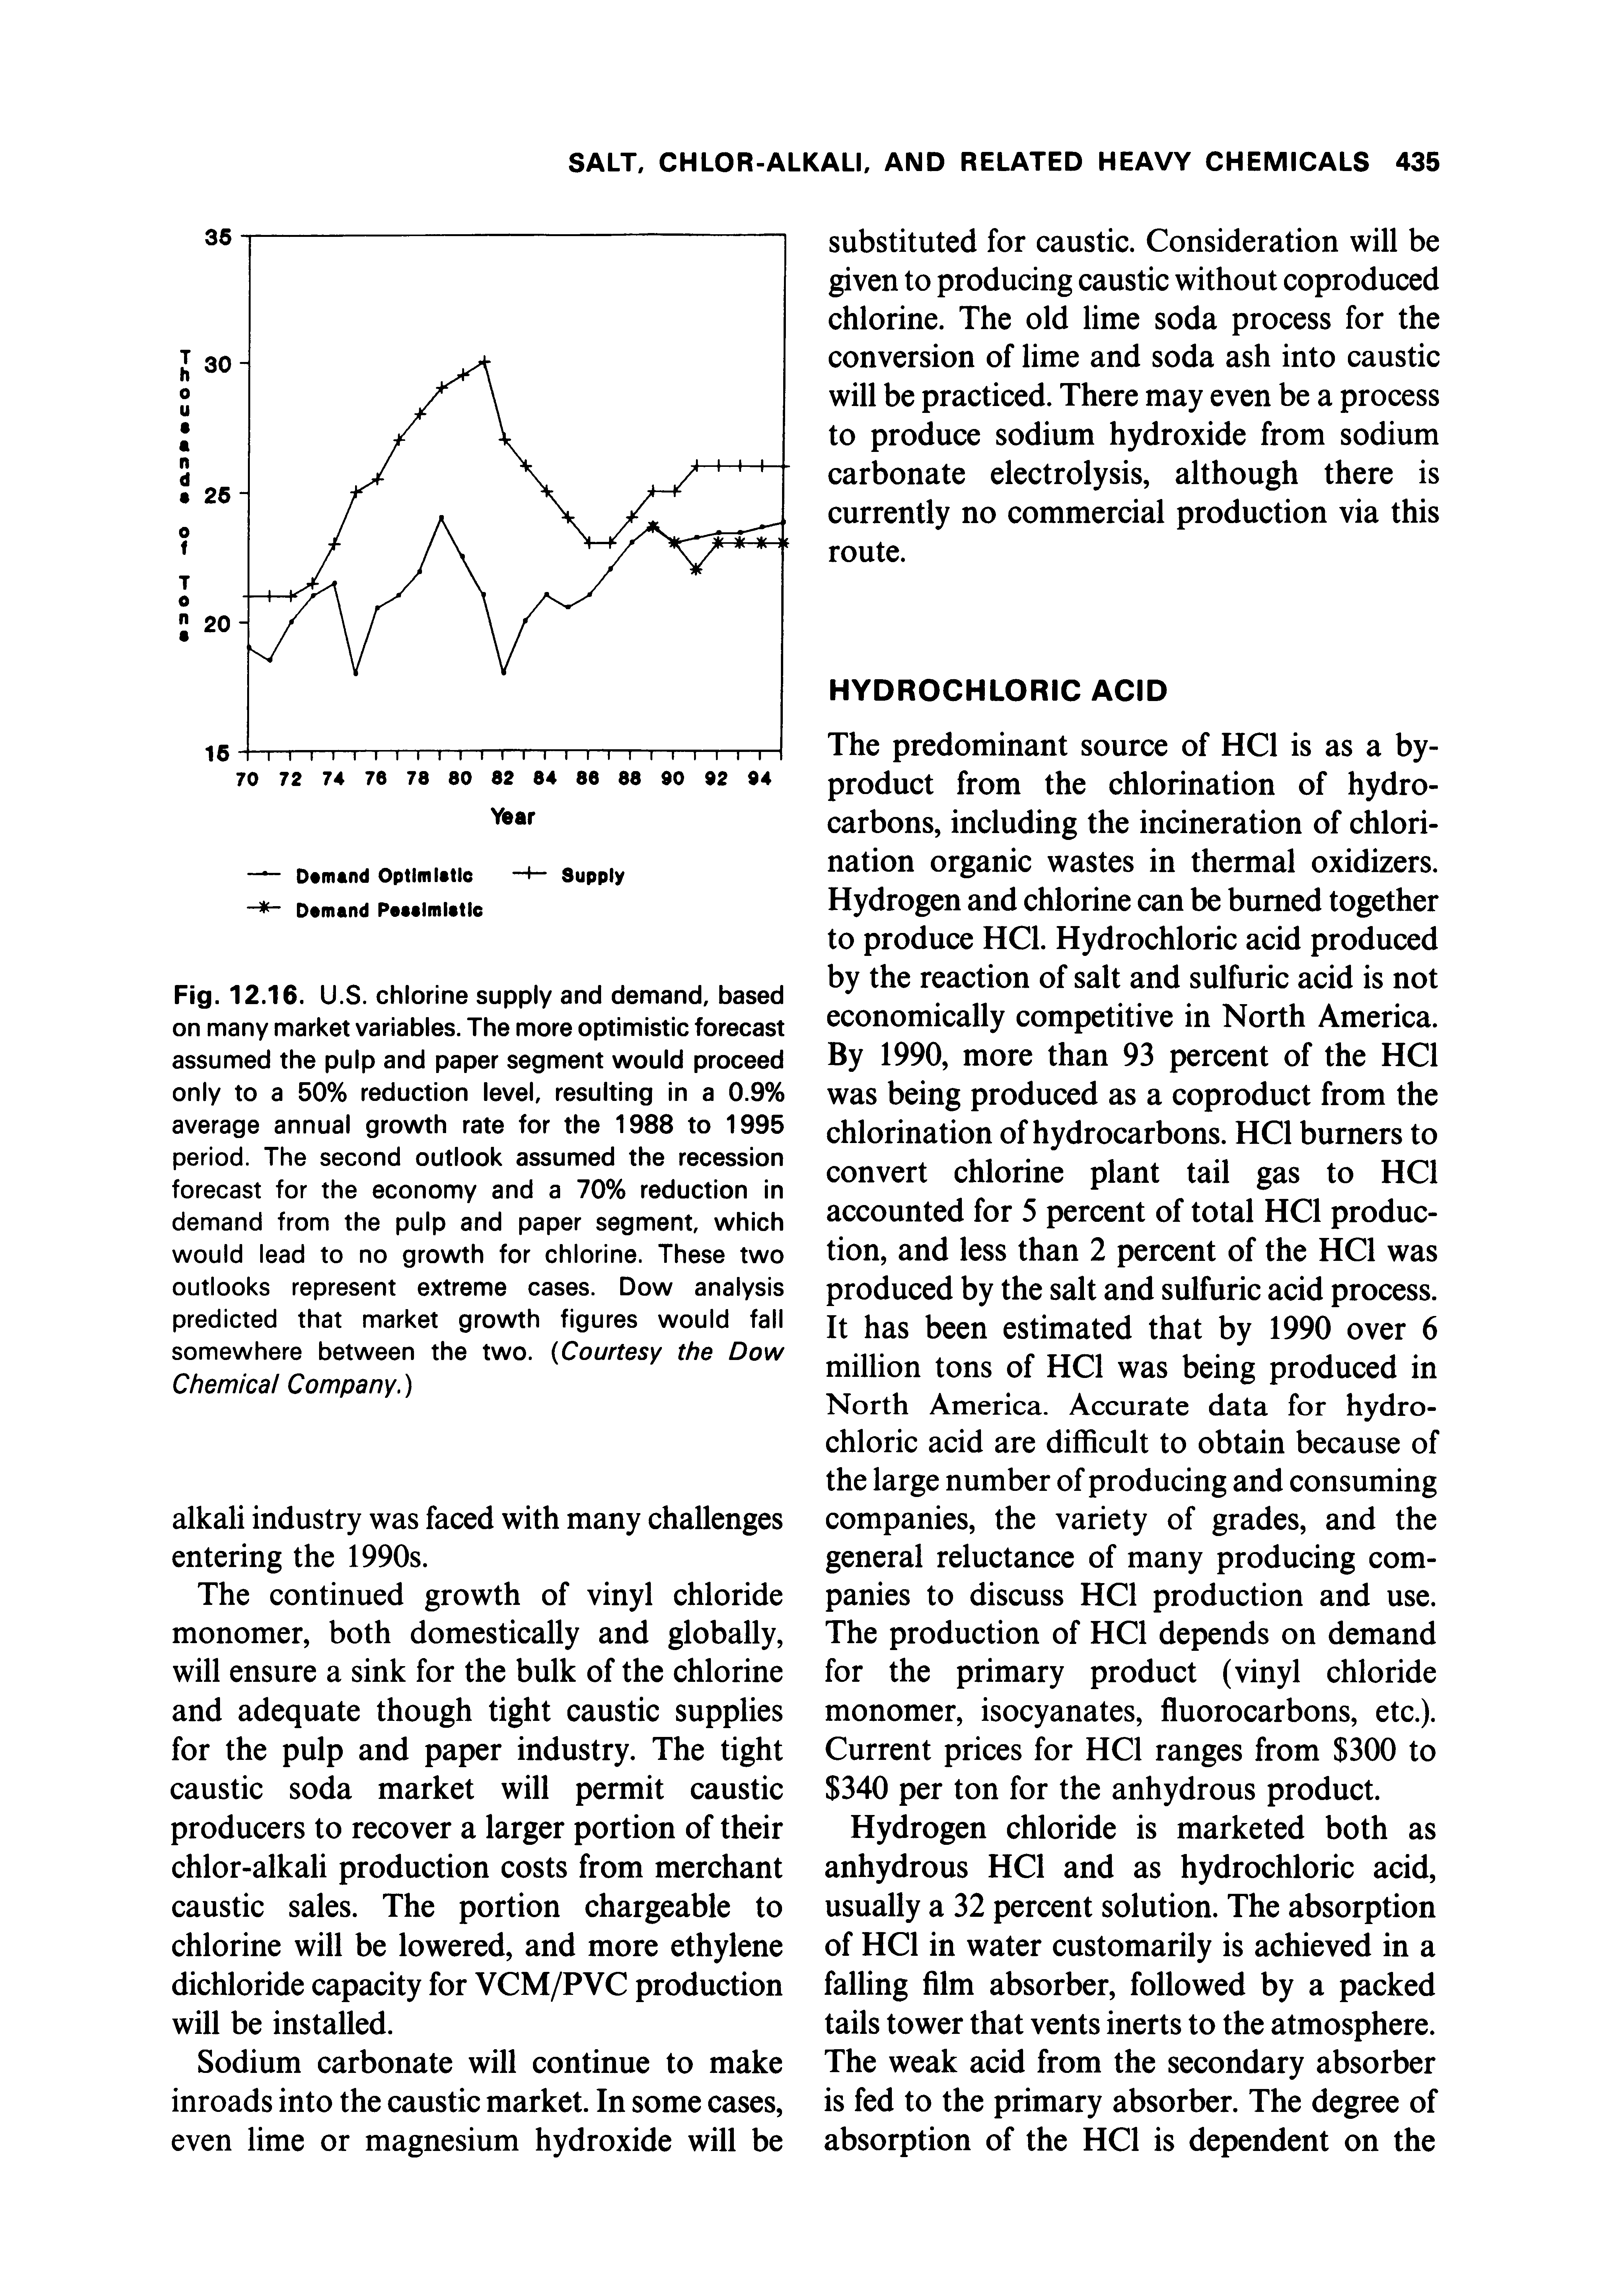 Fig. 12.16. U.S. chlorine supply and demand, based on many market variables. The more optimistic forecast assumed the pulp and paper segment would proceed only to a 50% reduction level, resulting in a 0.9% average annual growth rate for the 1988 to 1995 period. The second outlook assumed the recession forecast for the economy and a 70% reduction in demand from the pulp and paper segment, which would lead to no growth for chlorine. These two outlooks represent extreme cases. Dow analysis predicted that market growth figures would fall somewhere between the two. (Courtesy the Dow Chemical Company.)...